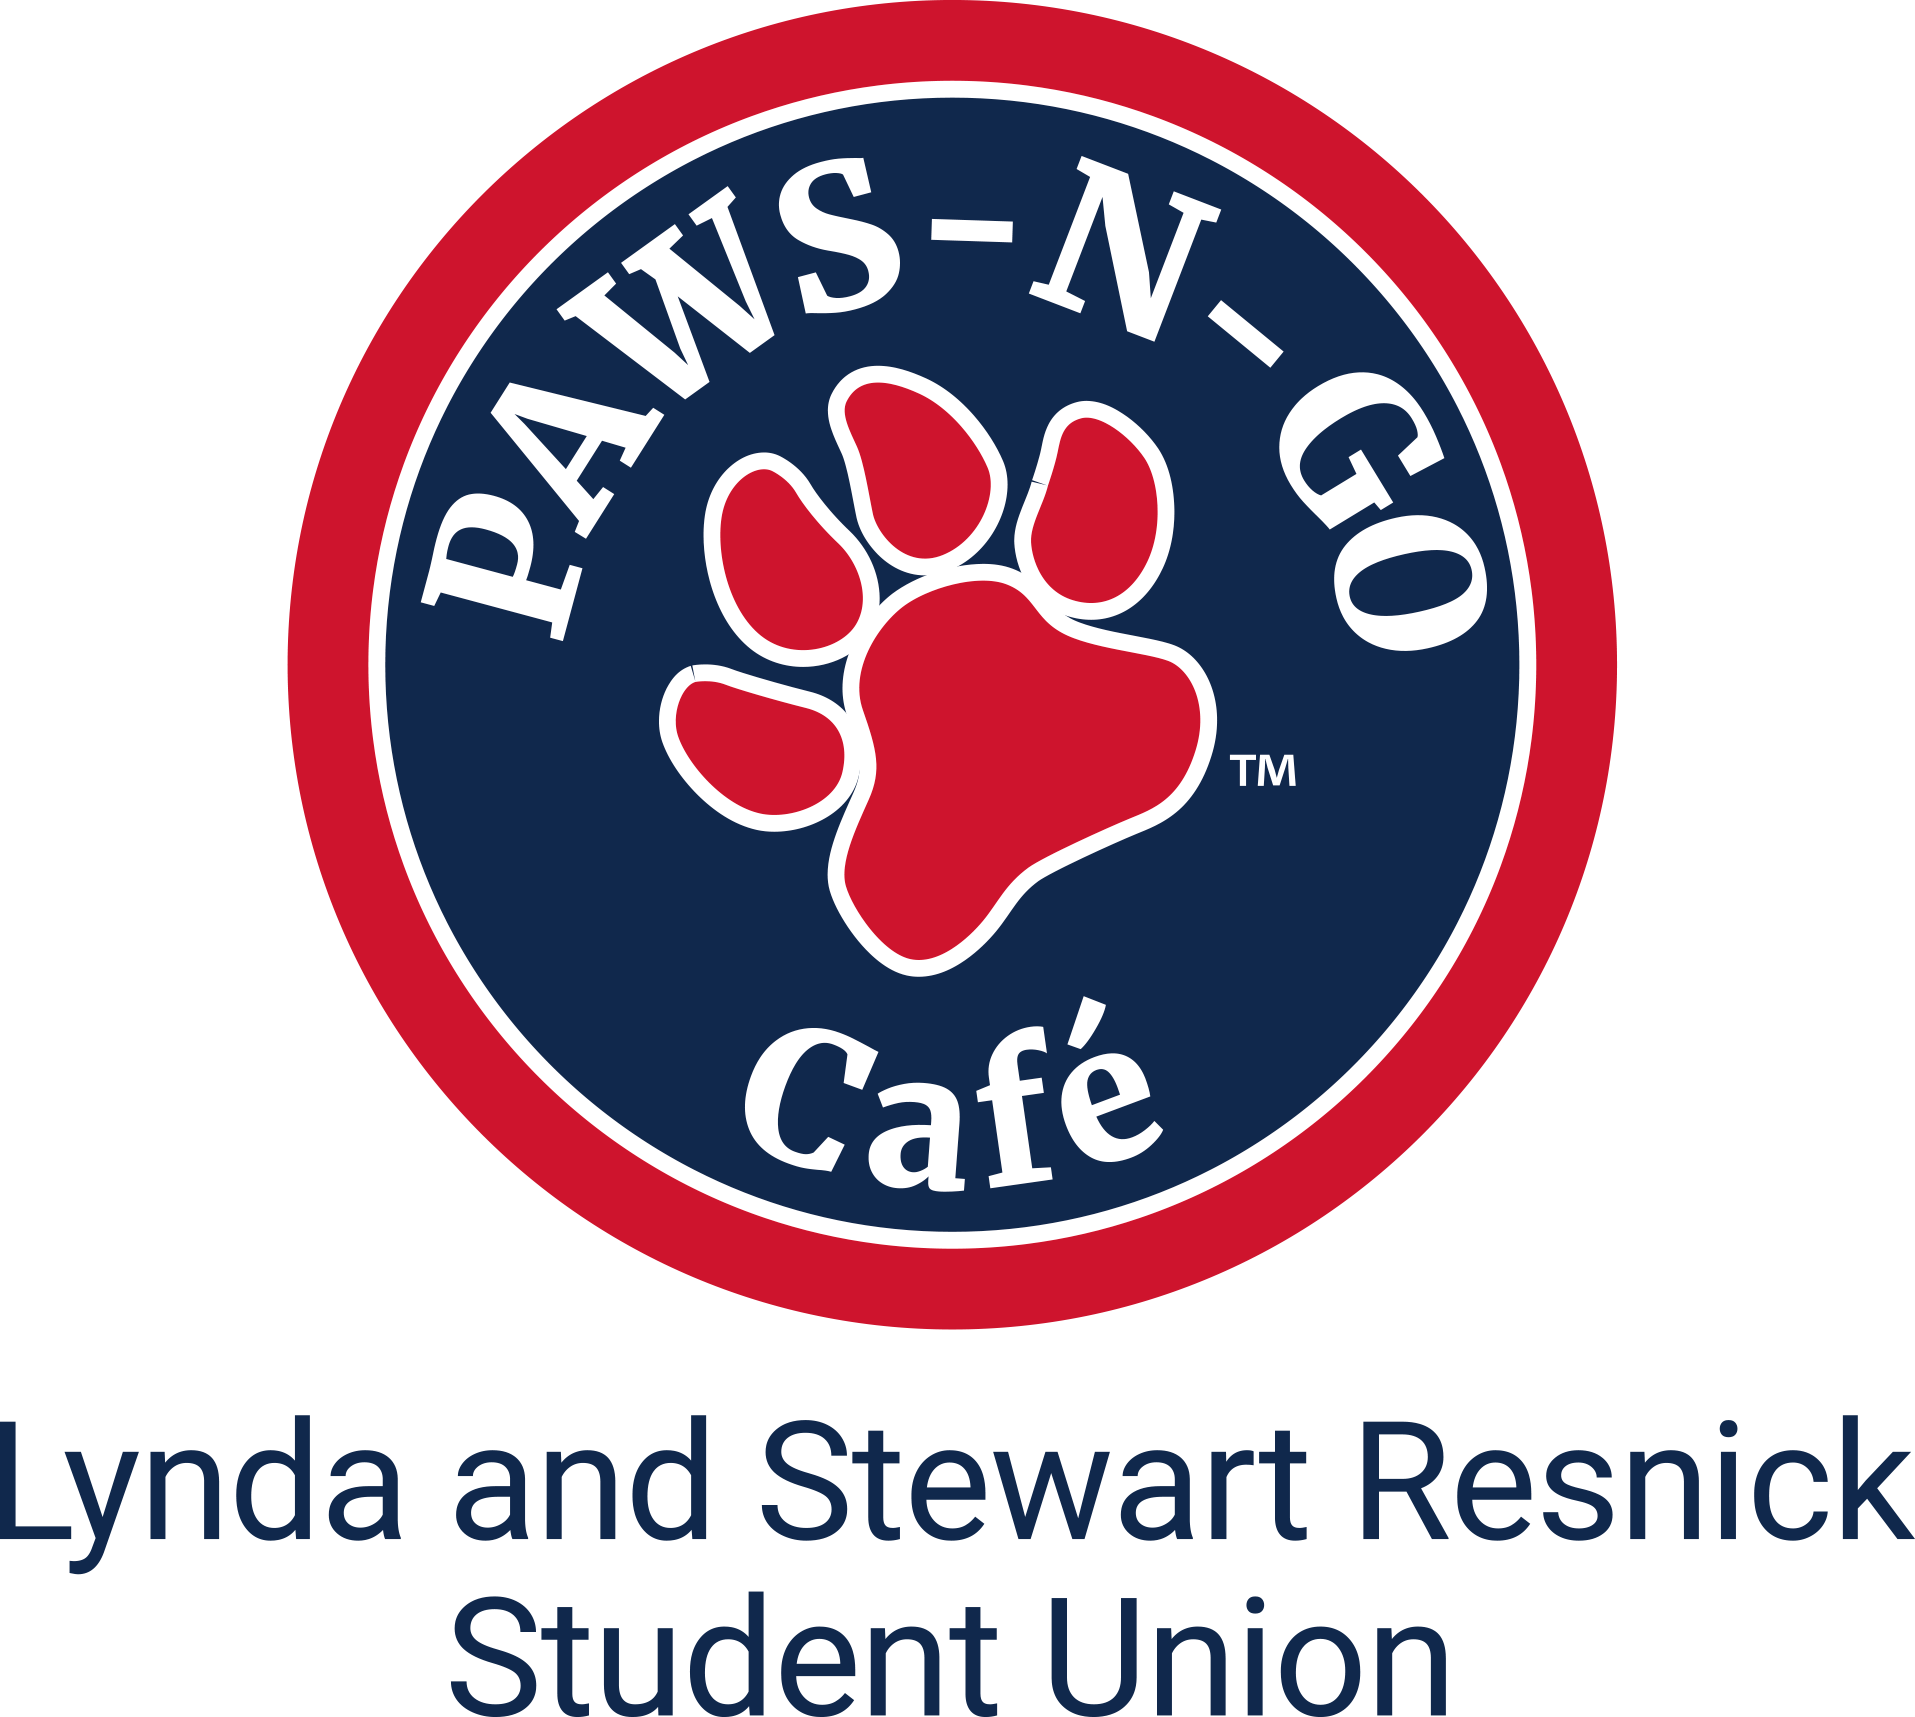 Resnick Student Union Paws-N-Go